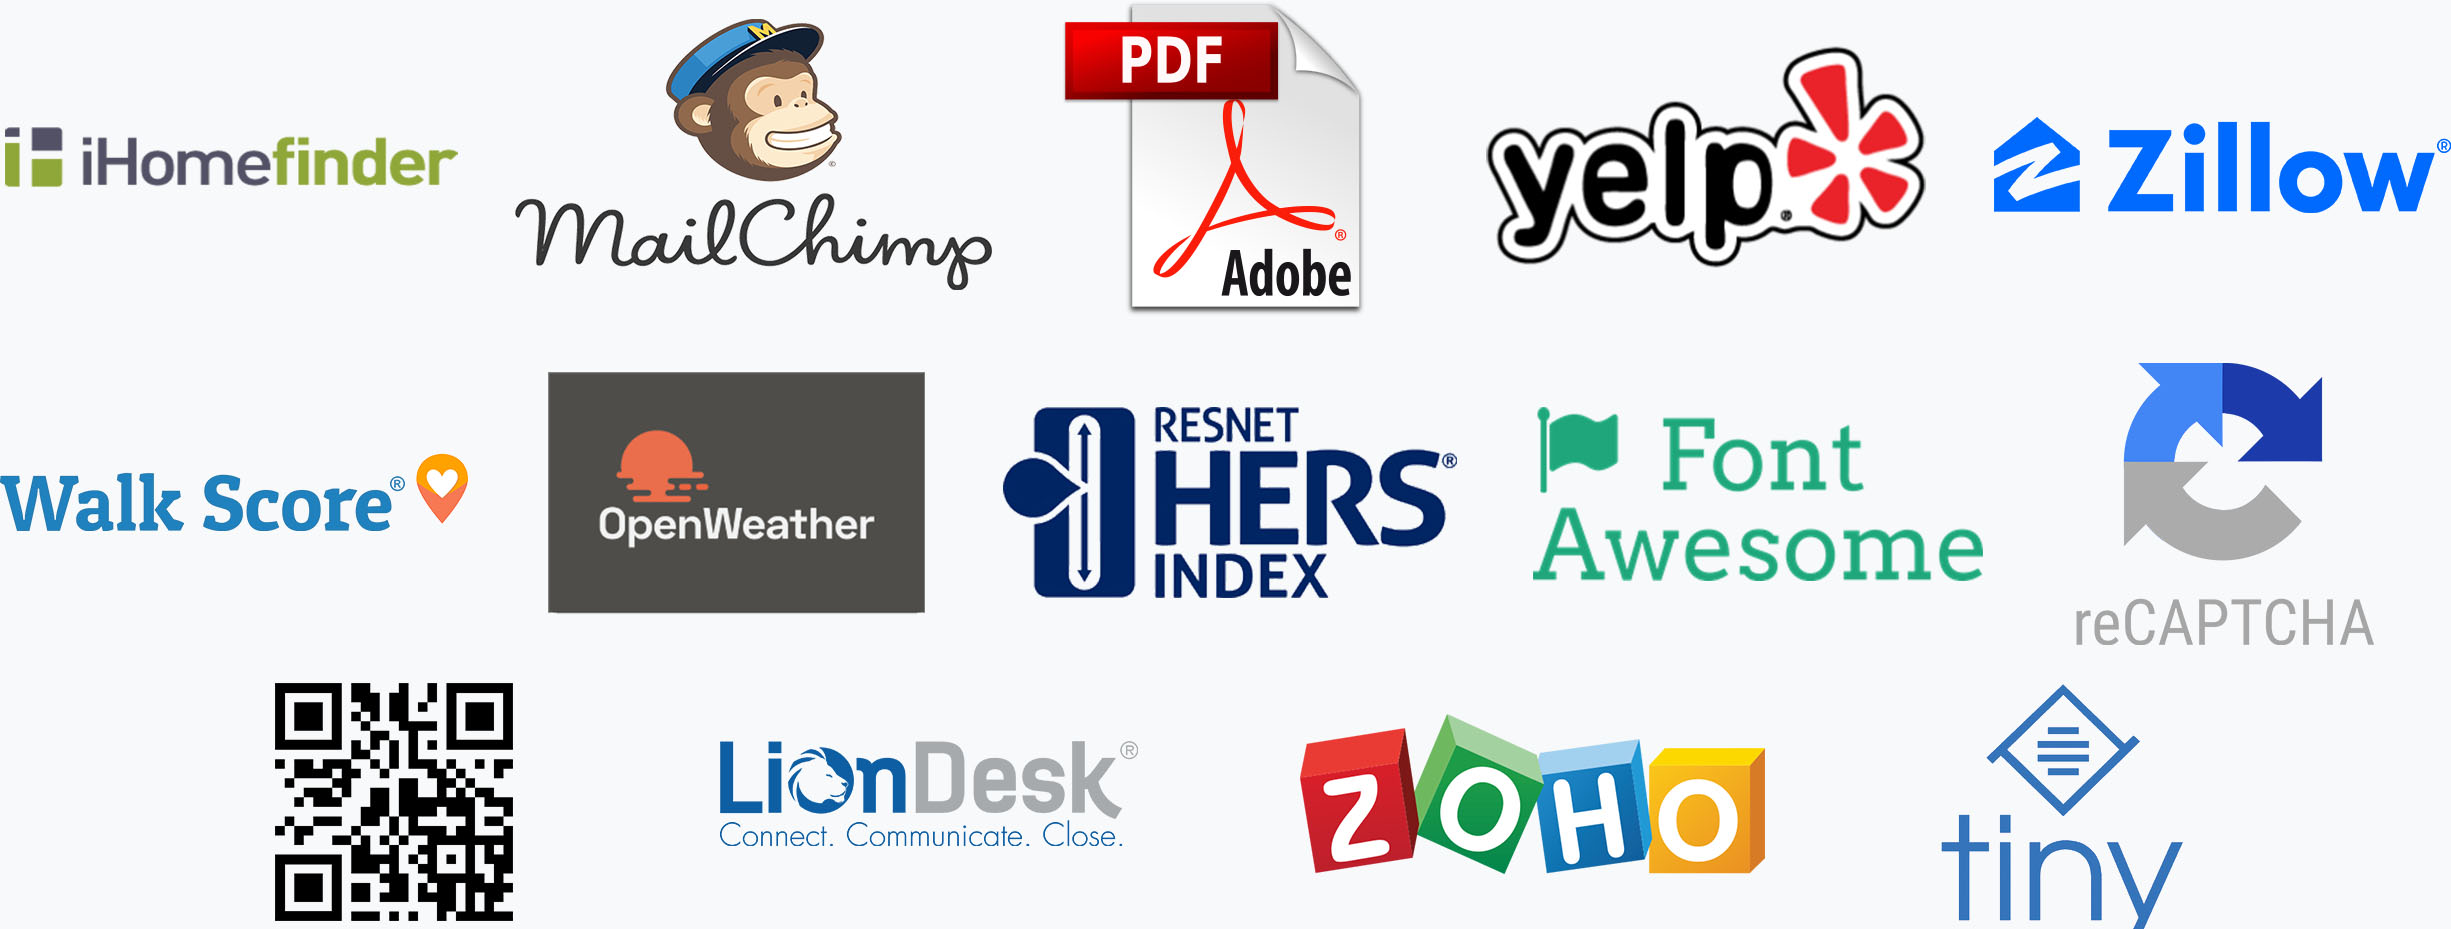 iHomefinder MailChimp Yelp Zillow Walk Score OpenWeather HERS Resnet Index Font Awesome reCaptcha QR Codes LionDesk ZoHo CRM tinyMCE